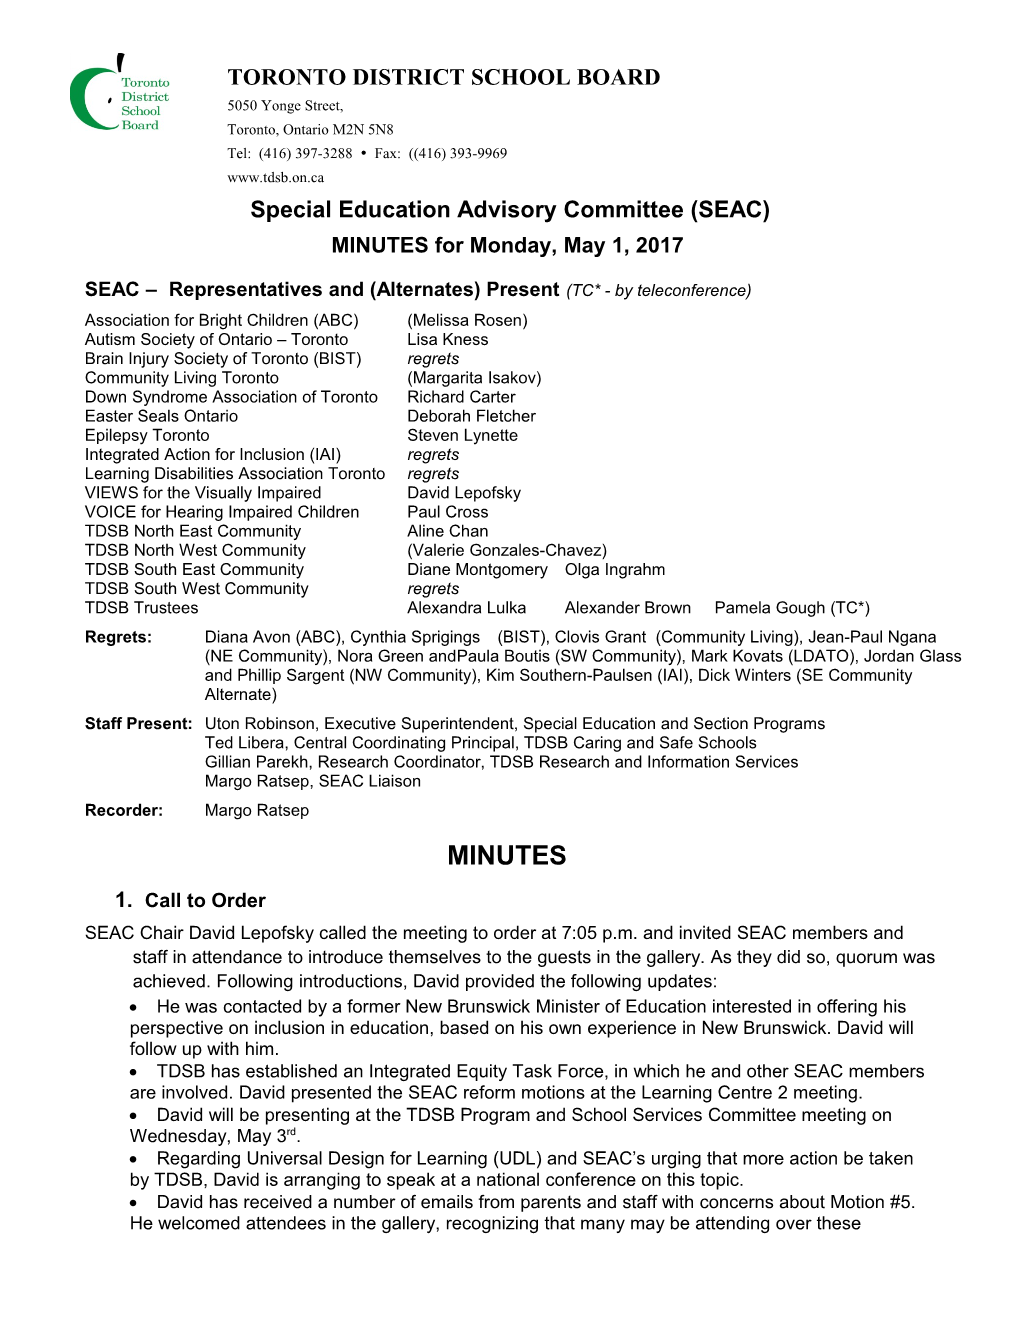 Special Education Advisory Committee (SEAC) TDSB Special Education Reform Draft Motions